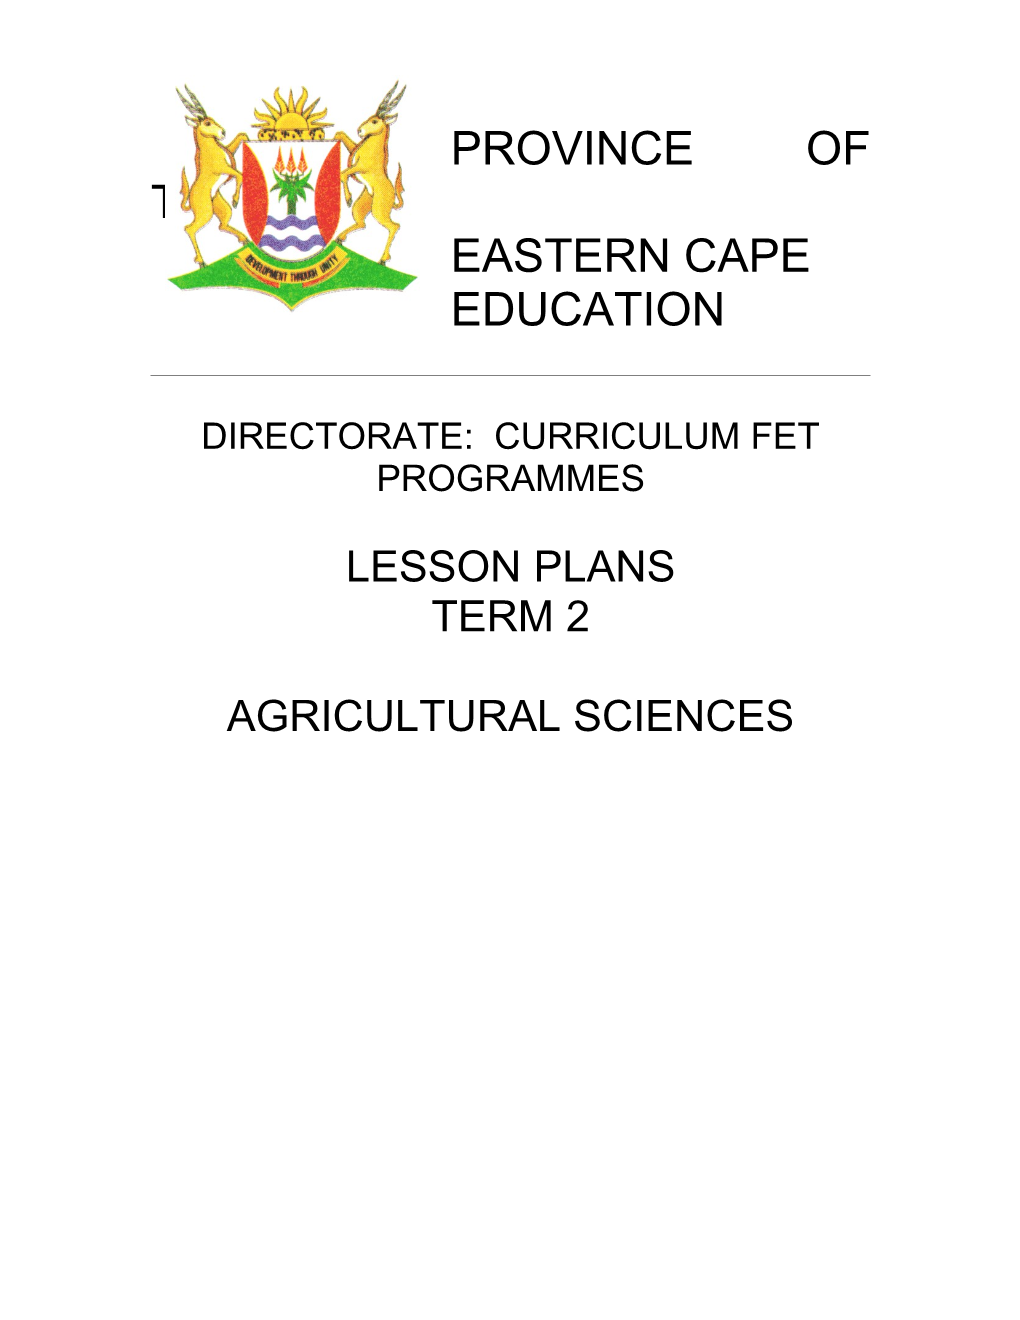 Lesson Plan Format for Agricultural Sciences